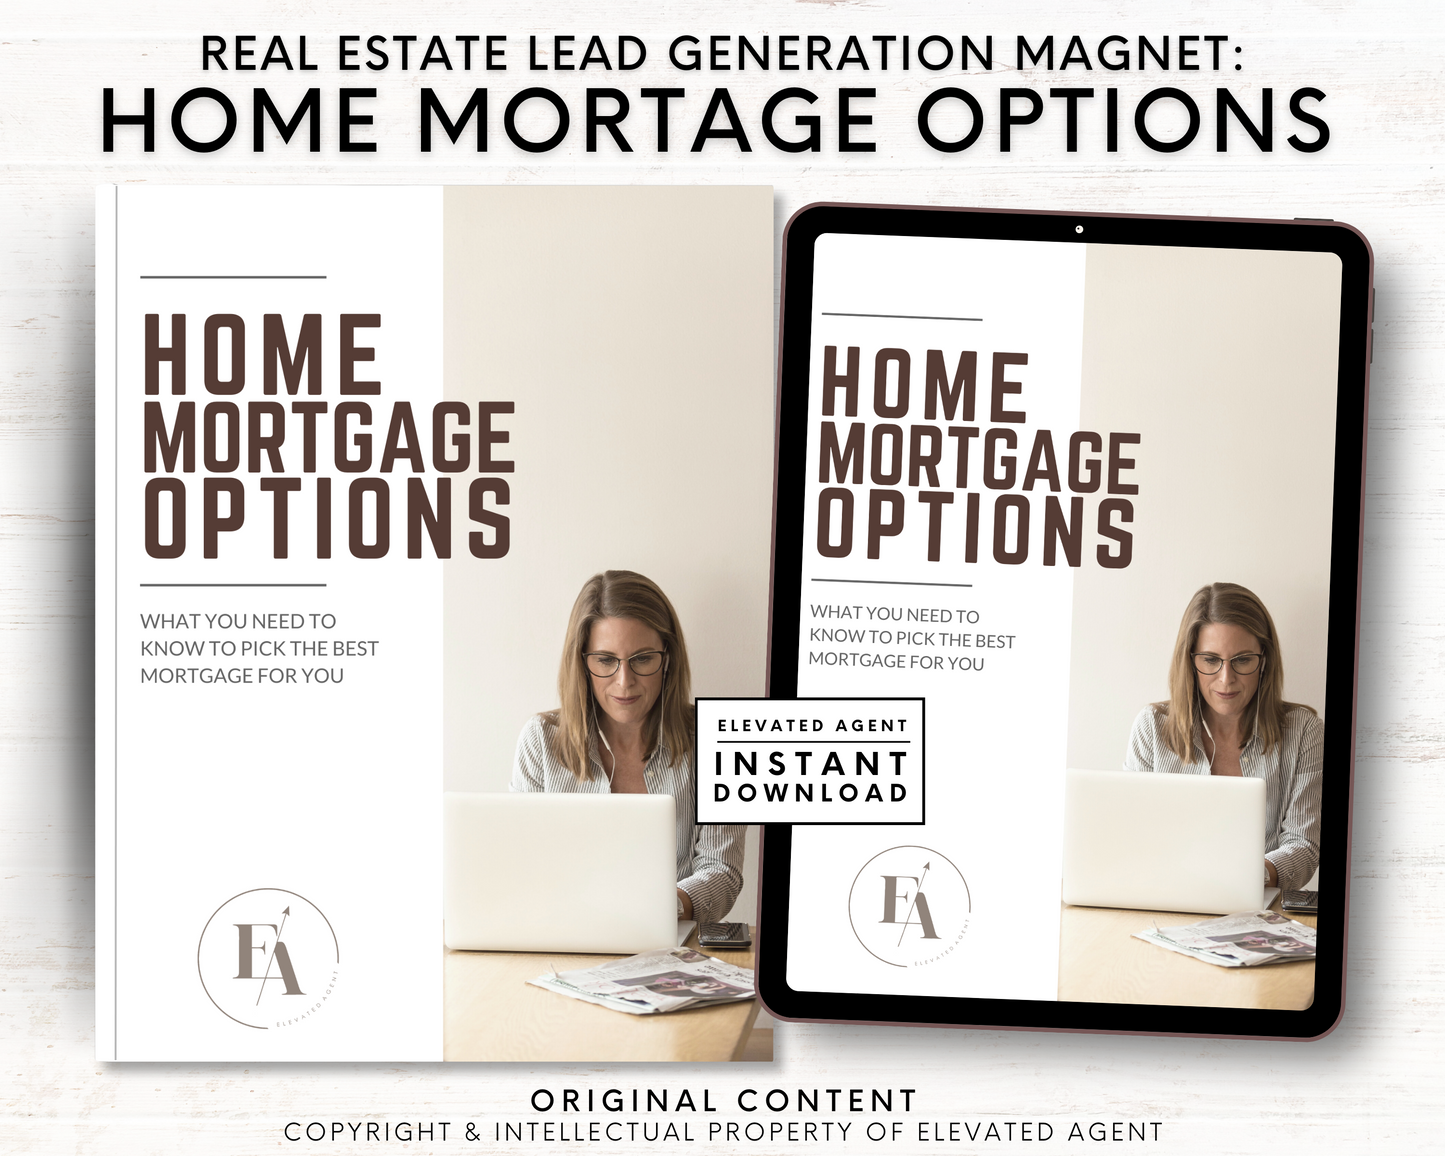 Mortgage Guide Mortgage Loan Officer Marketing Mortgage Buying Process Packet Real Estate Template Mortgage Loan Realtor Marketing Canva